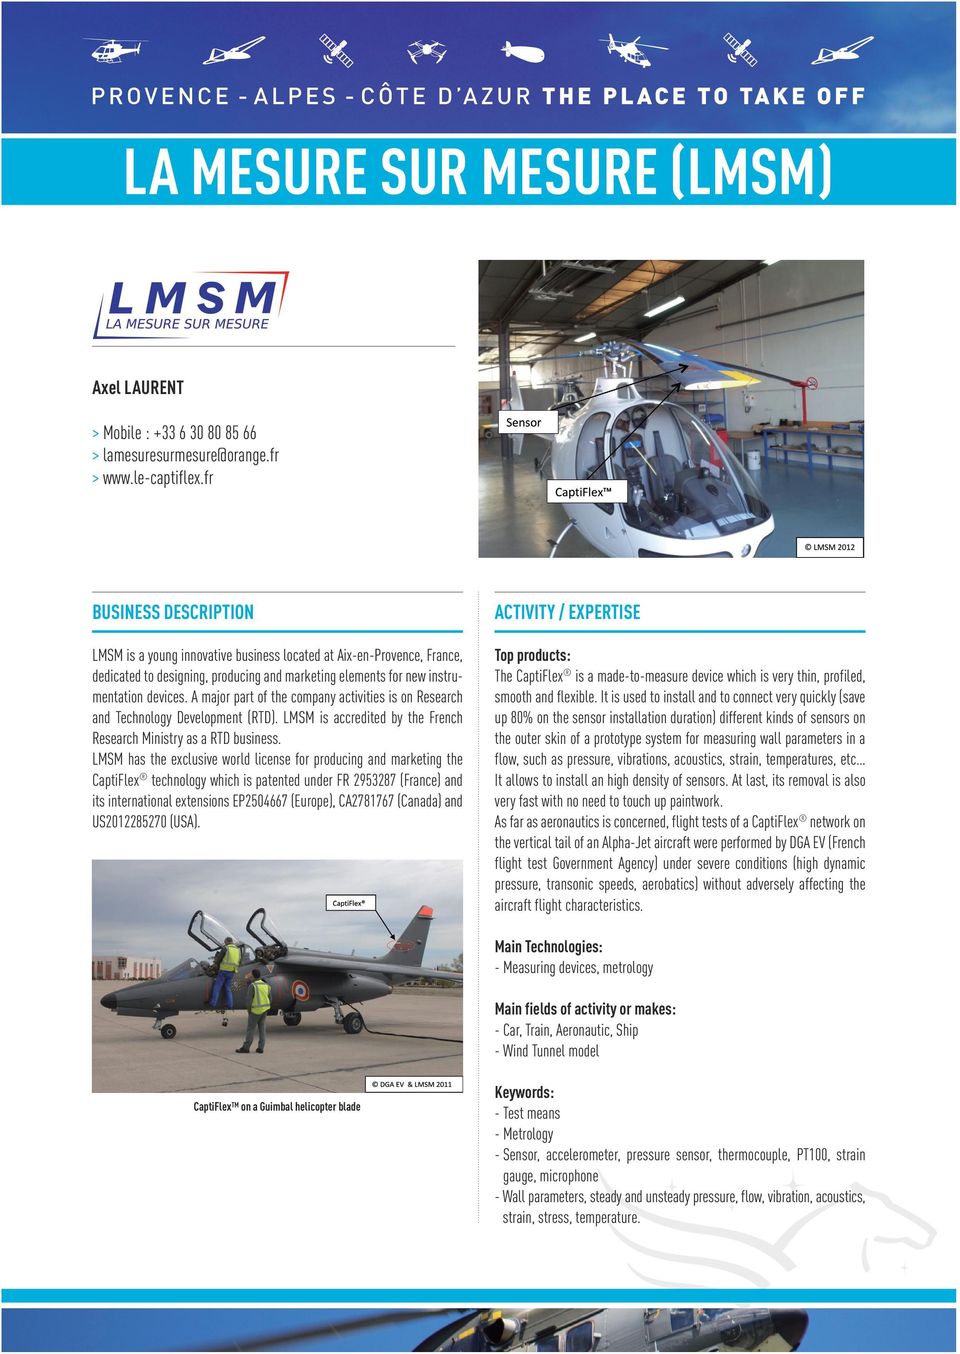 A major part of the company activities is on Research and Technology Development (RTD). LMSM is accredited by the French Research Ministry as a RTD business.